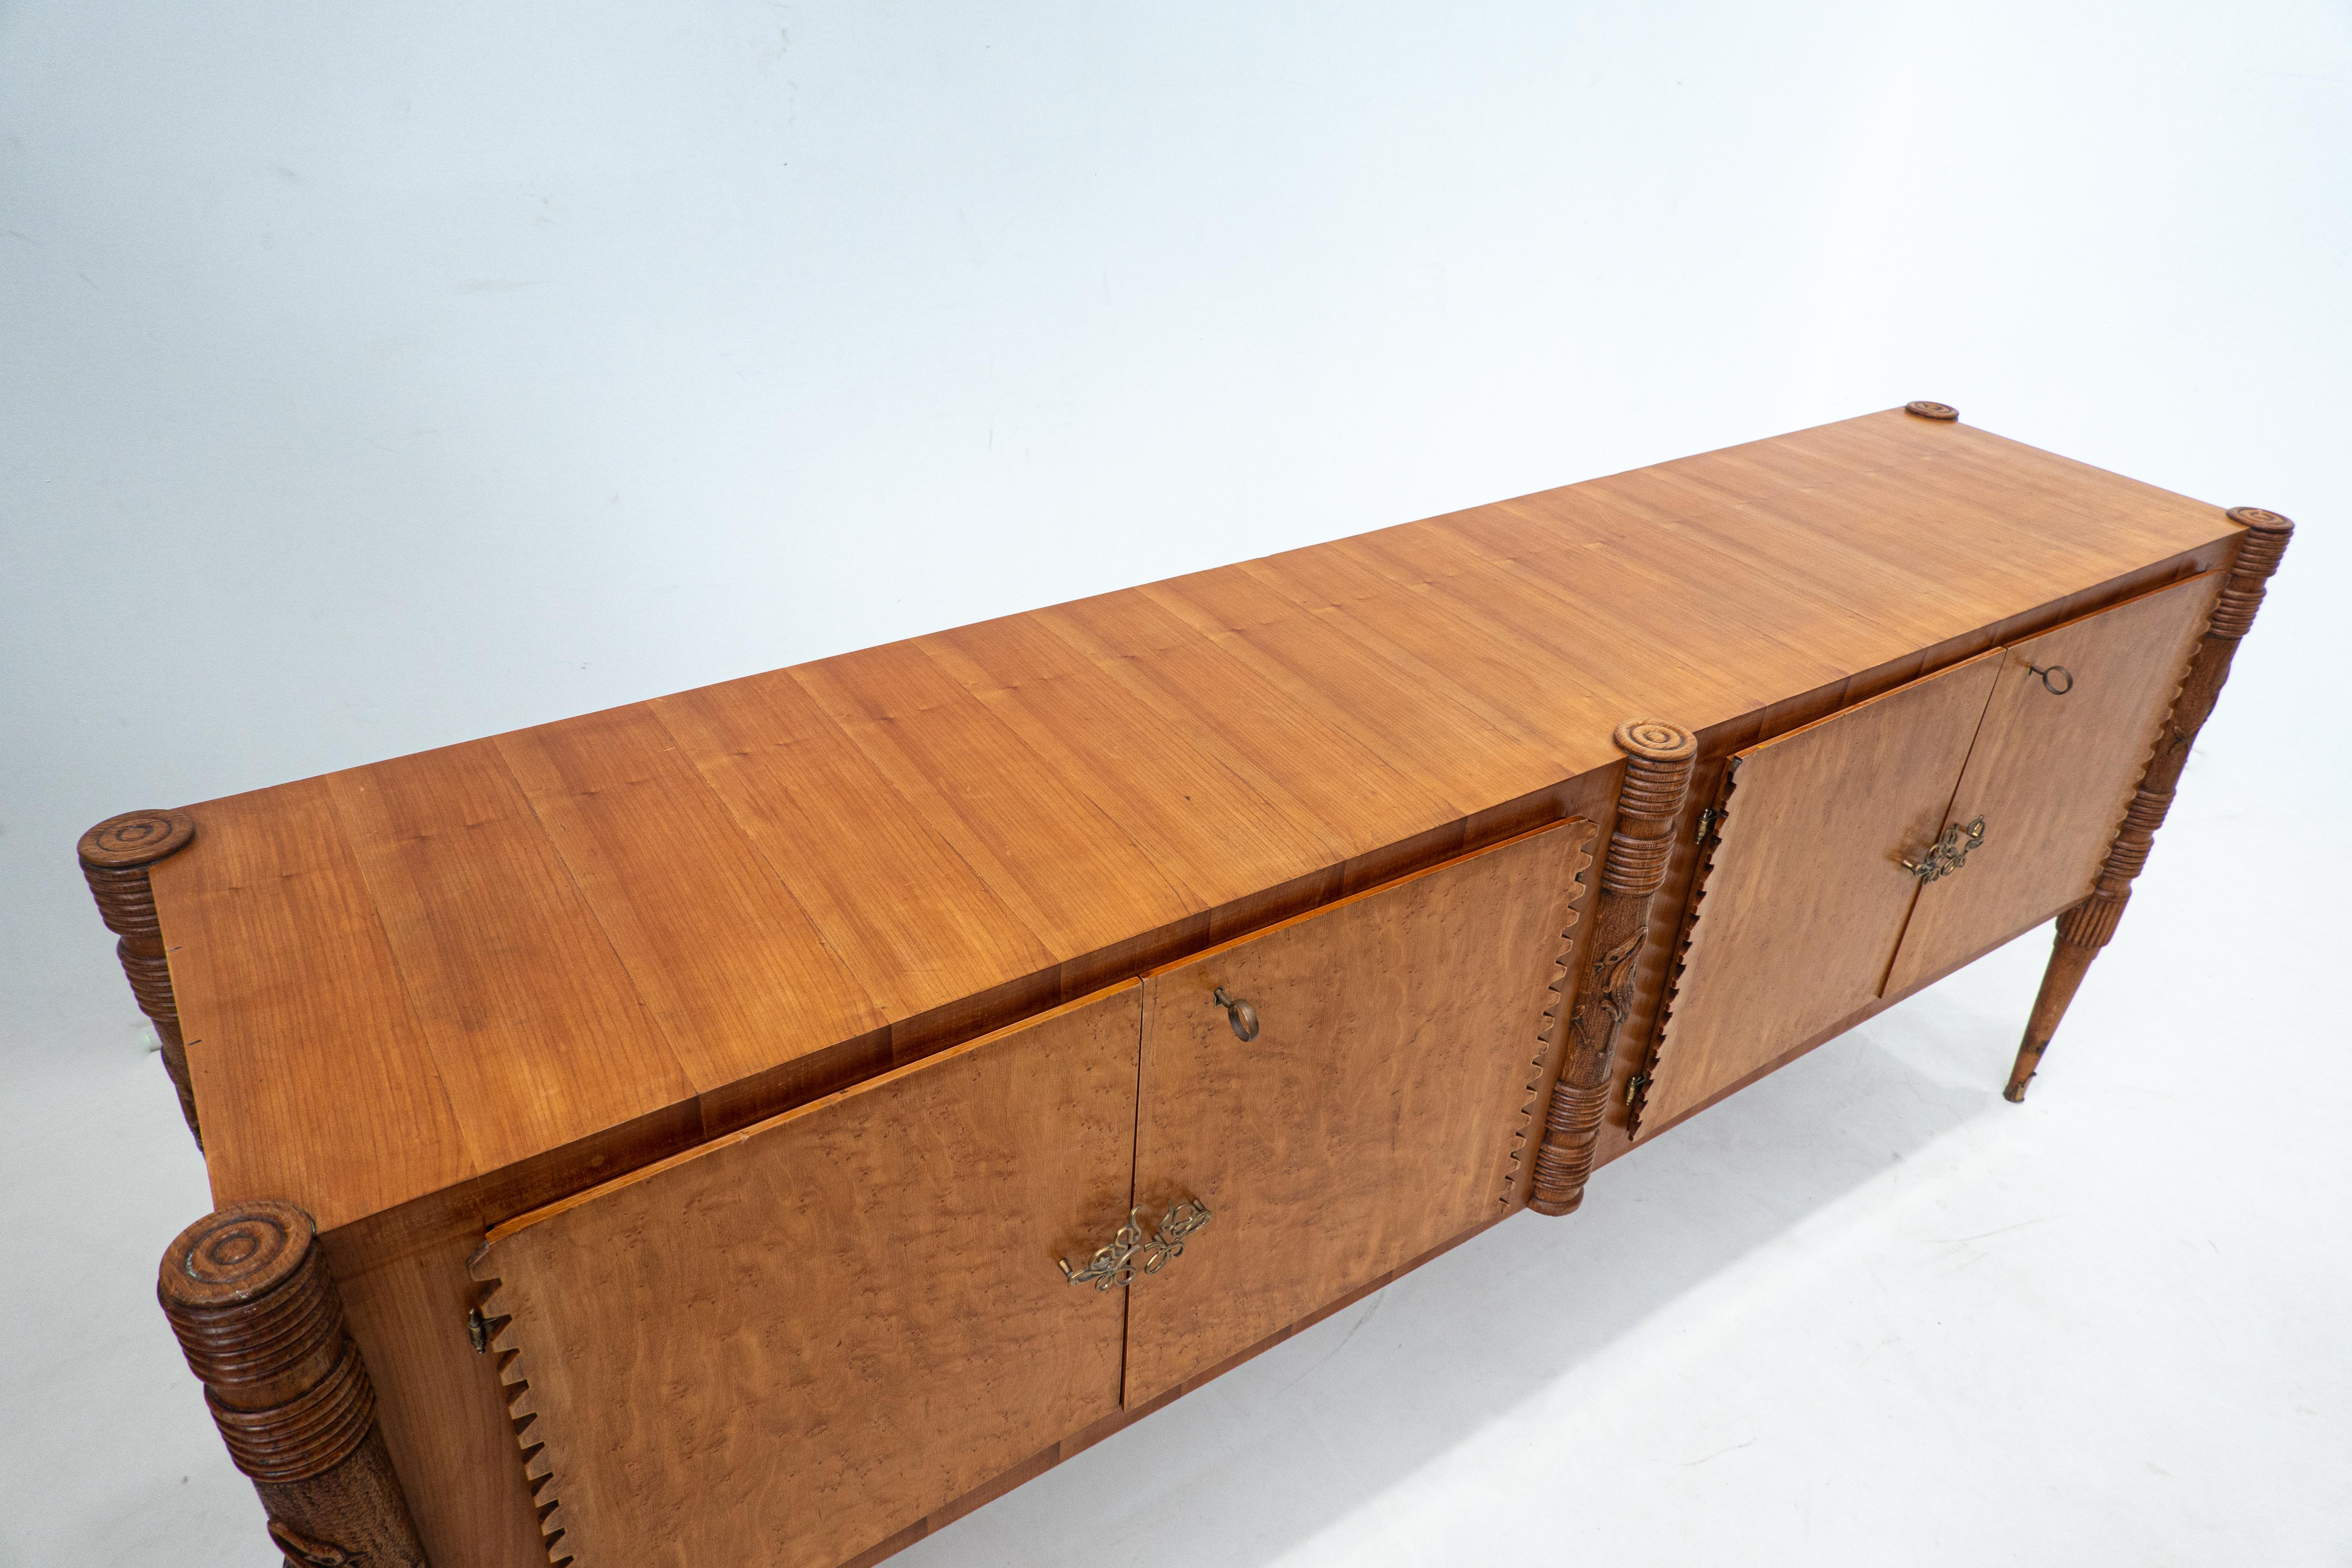 Large Italian Wooden Sideboard by Pier Luigi Colli with Four Doors, 1940s For Sale 2